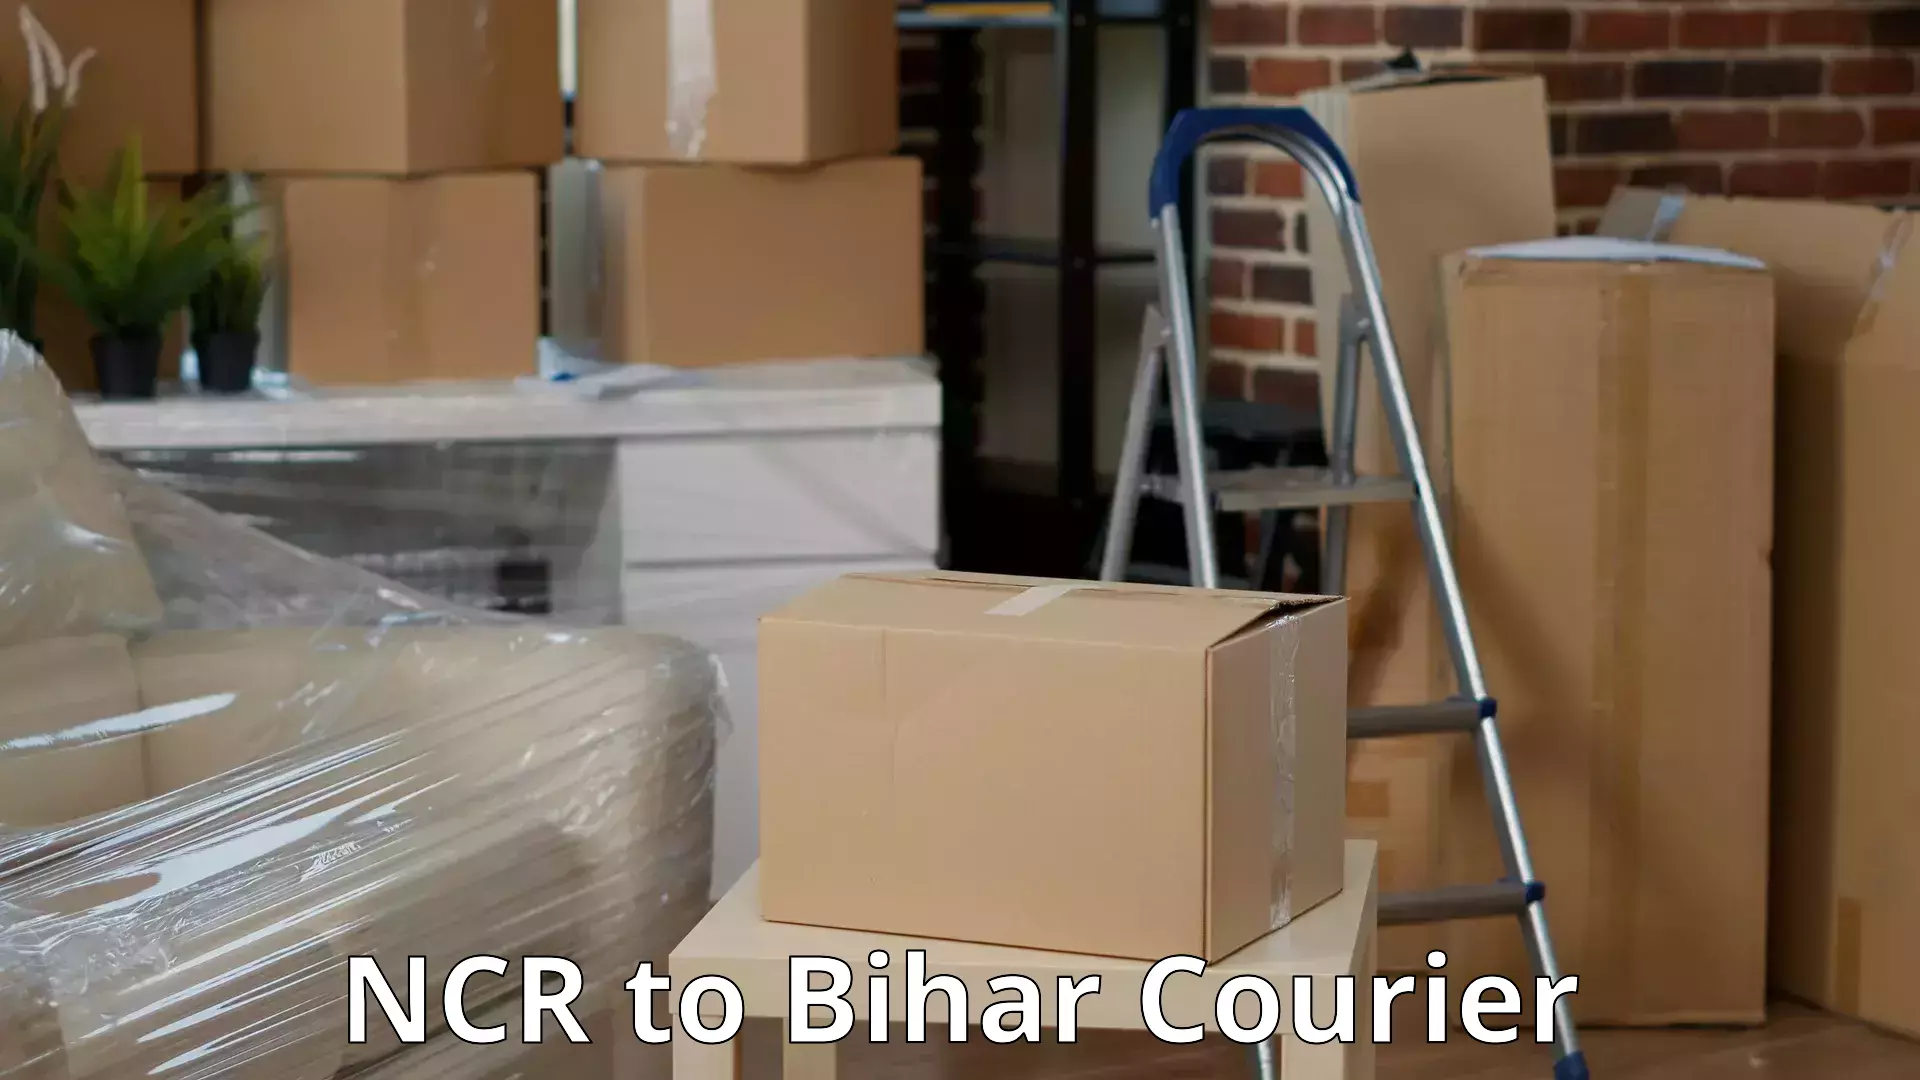 Professional relocation services NCR to Patna